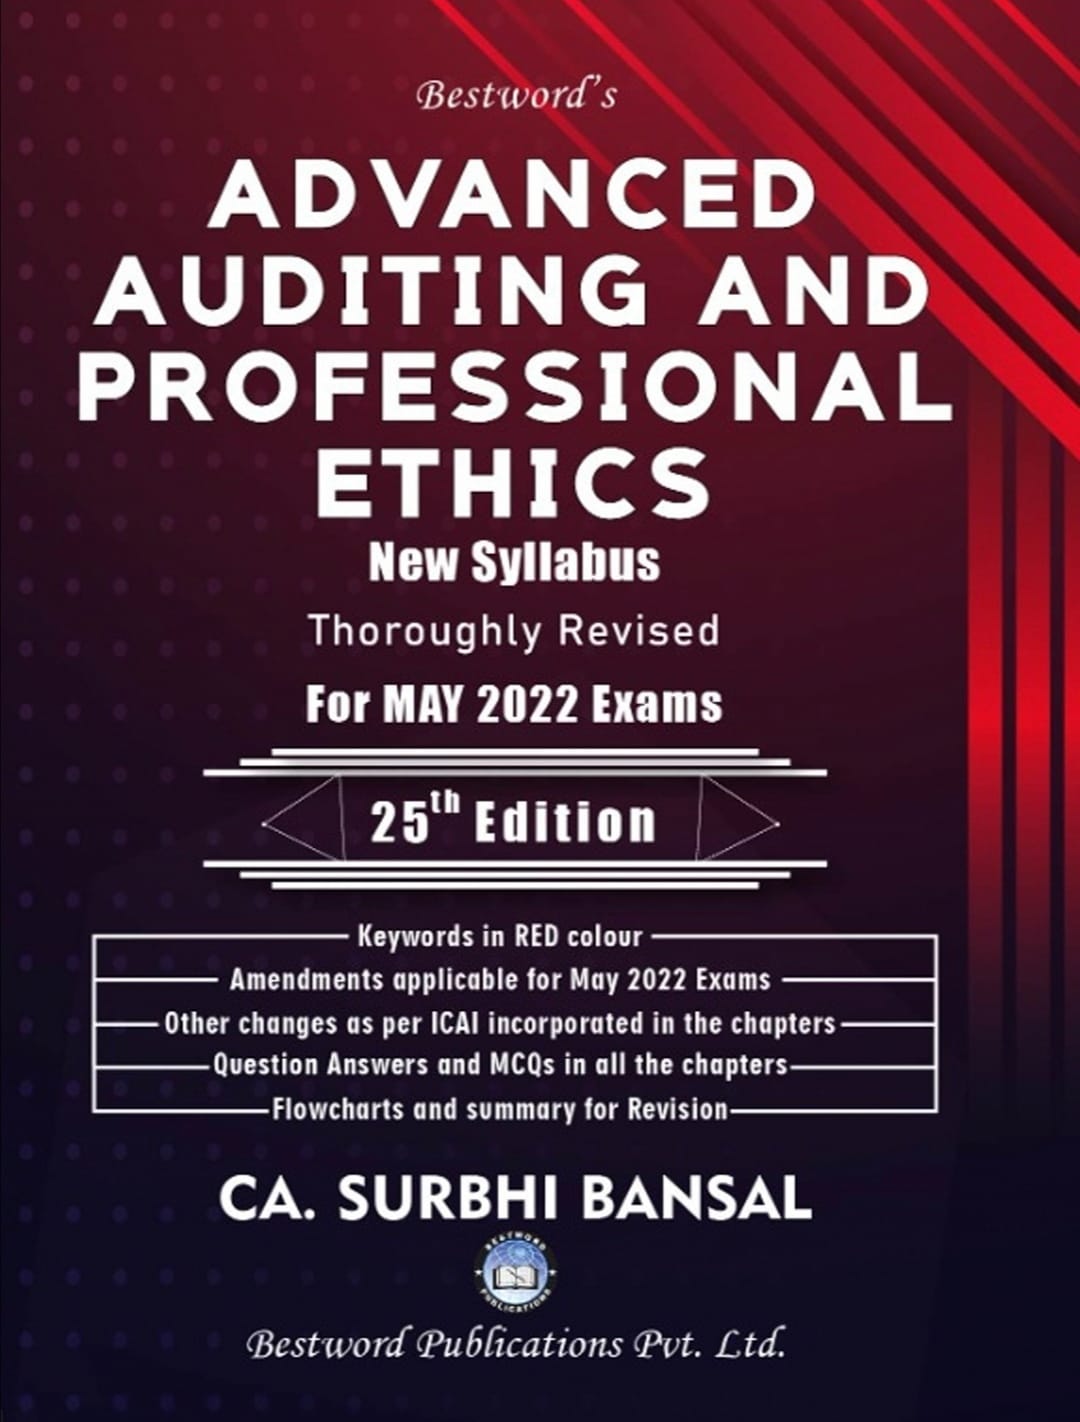 bestword's-advanced-auditing-and-professional-ethics---by-ca-surbhi-bansal---25th-edition---for-ca-(final)-may-2022-exams-(new-syllabus)